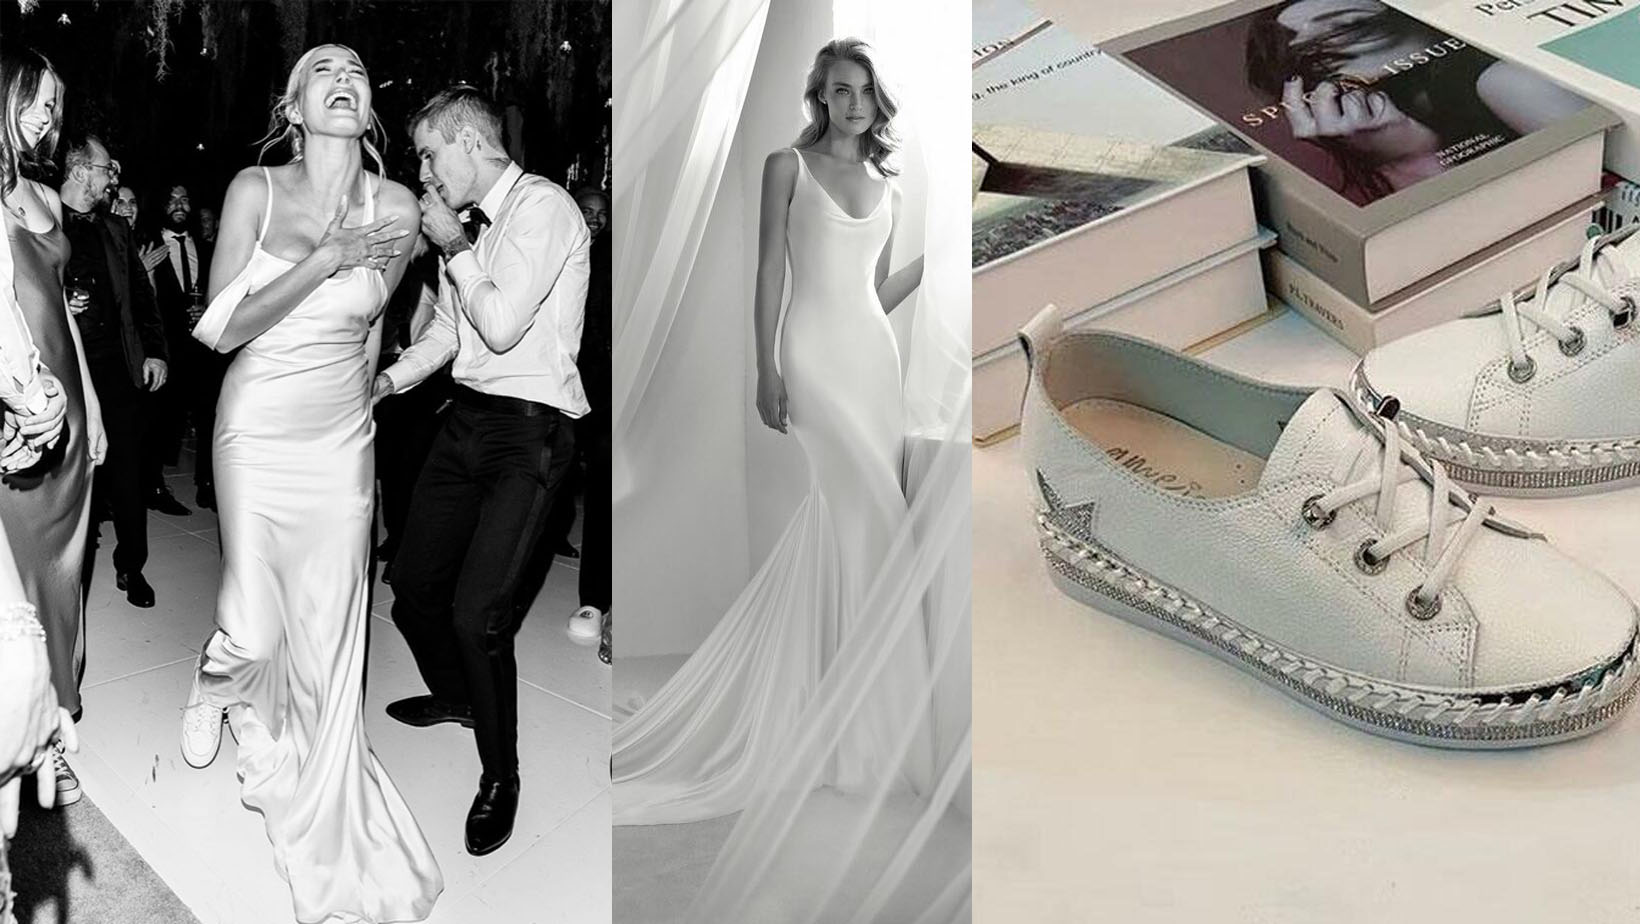 Hailey Bieber Wedding Reception: Ribelia Wedding Dress by Pronovias and Gamma Leather Lace-Up Sneakers by Ameise at Fashionably Yours